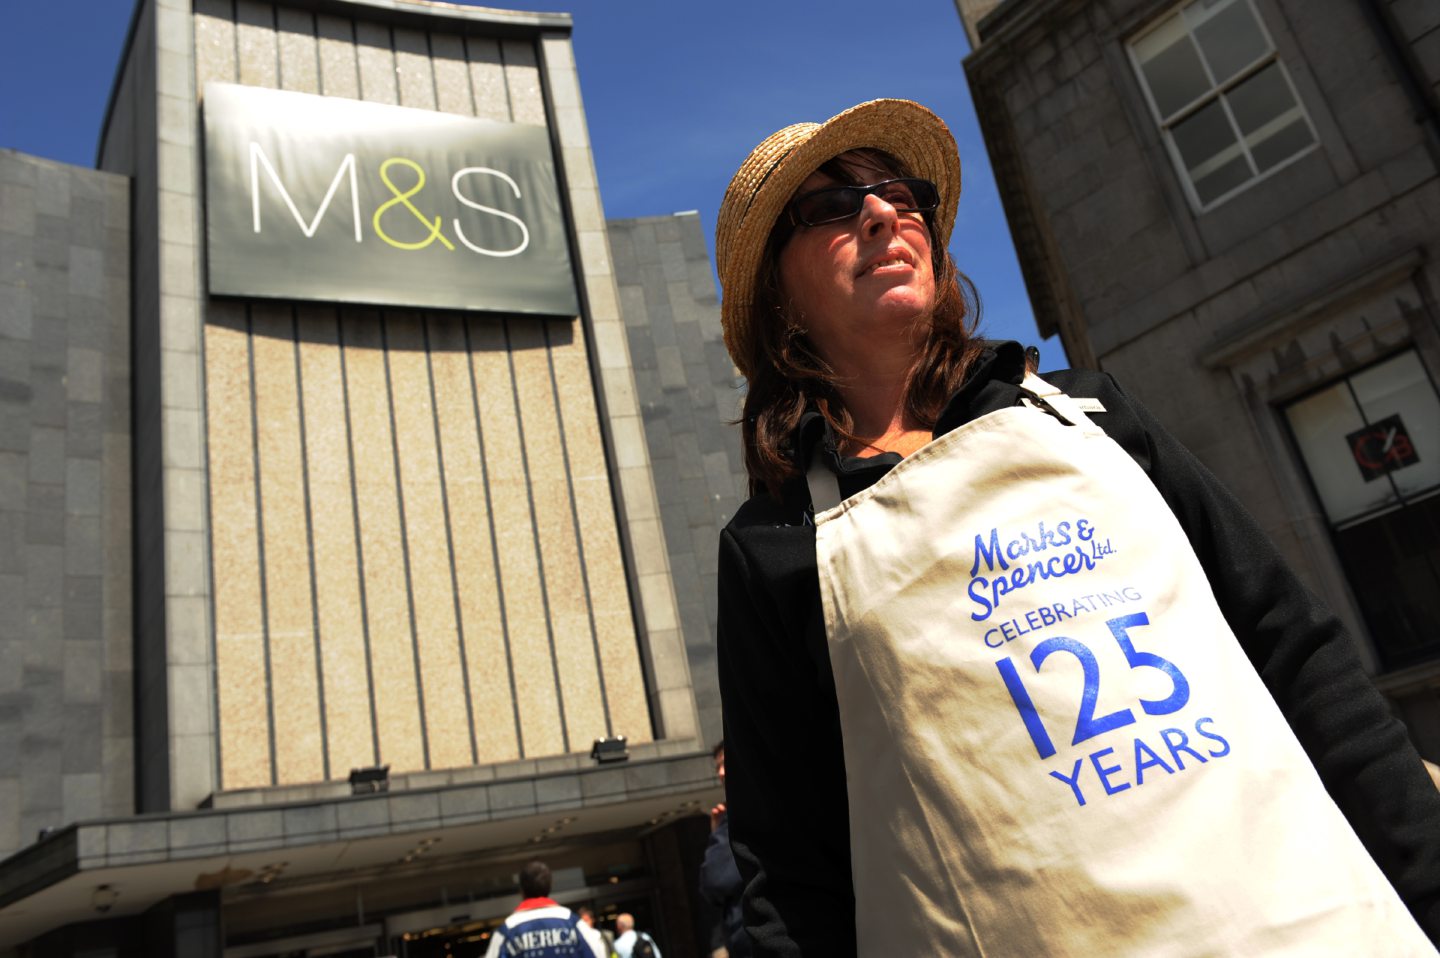 A woman in an apron reading "Marks & Spencer celebrating 125 years" outside the Aberdeen shop